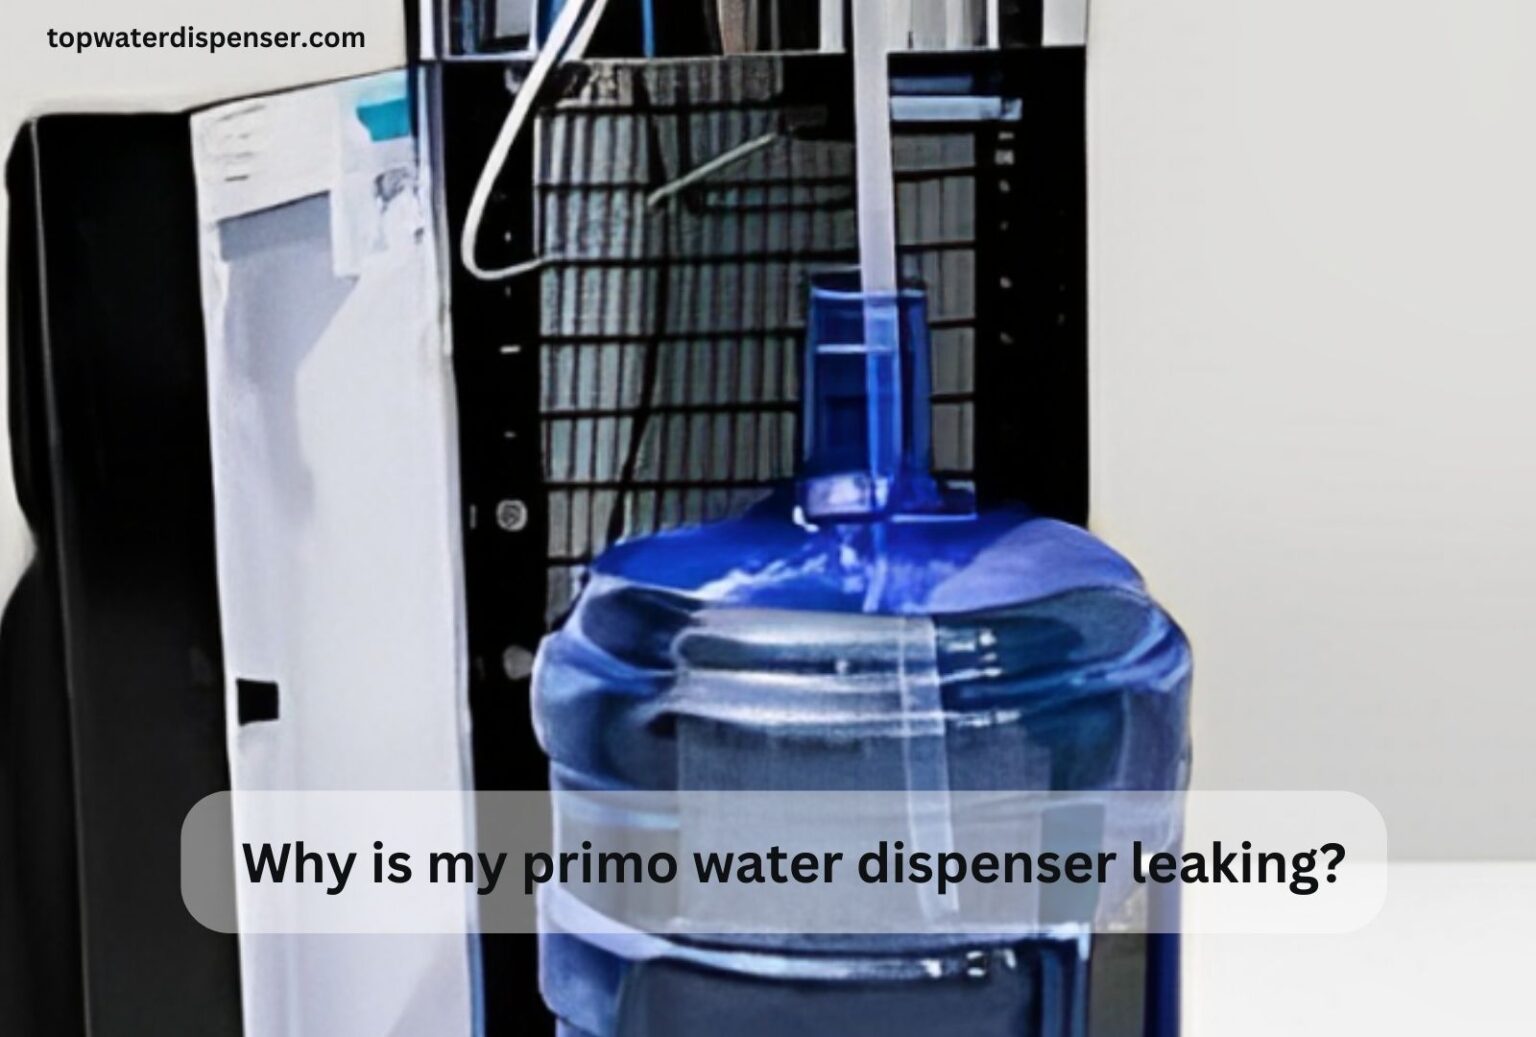 Why is my primo water dispenser leaking?